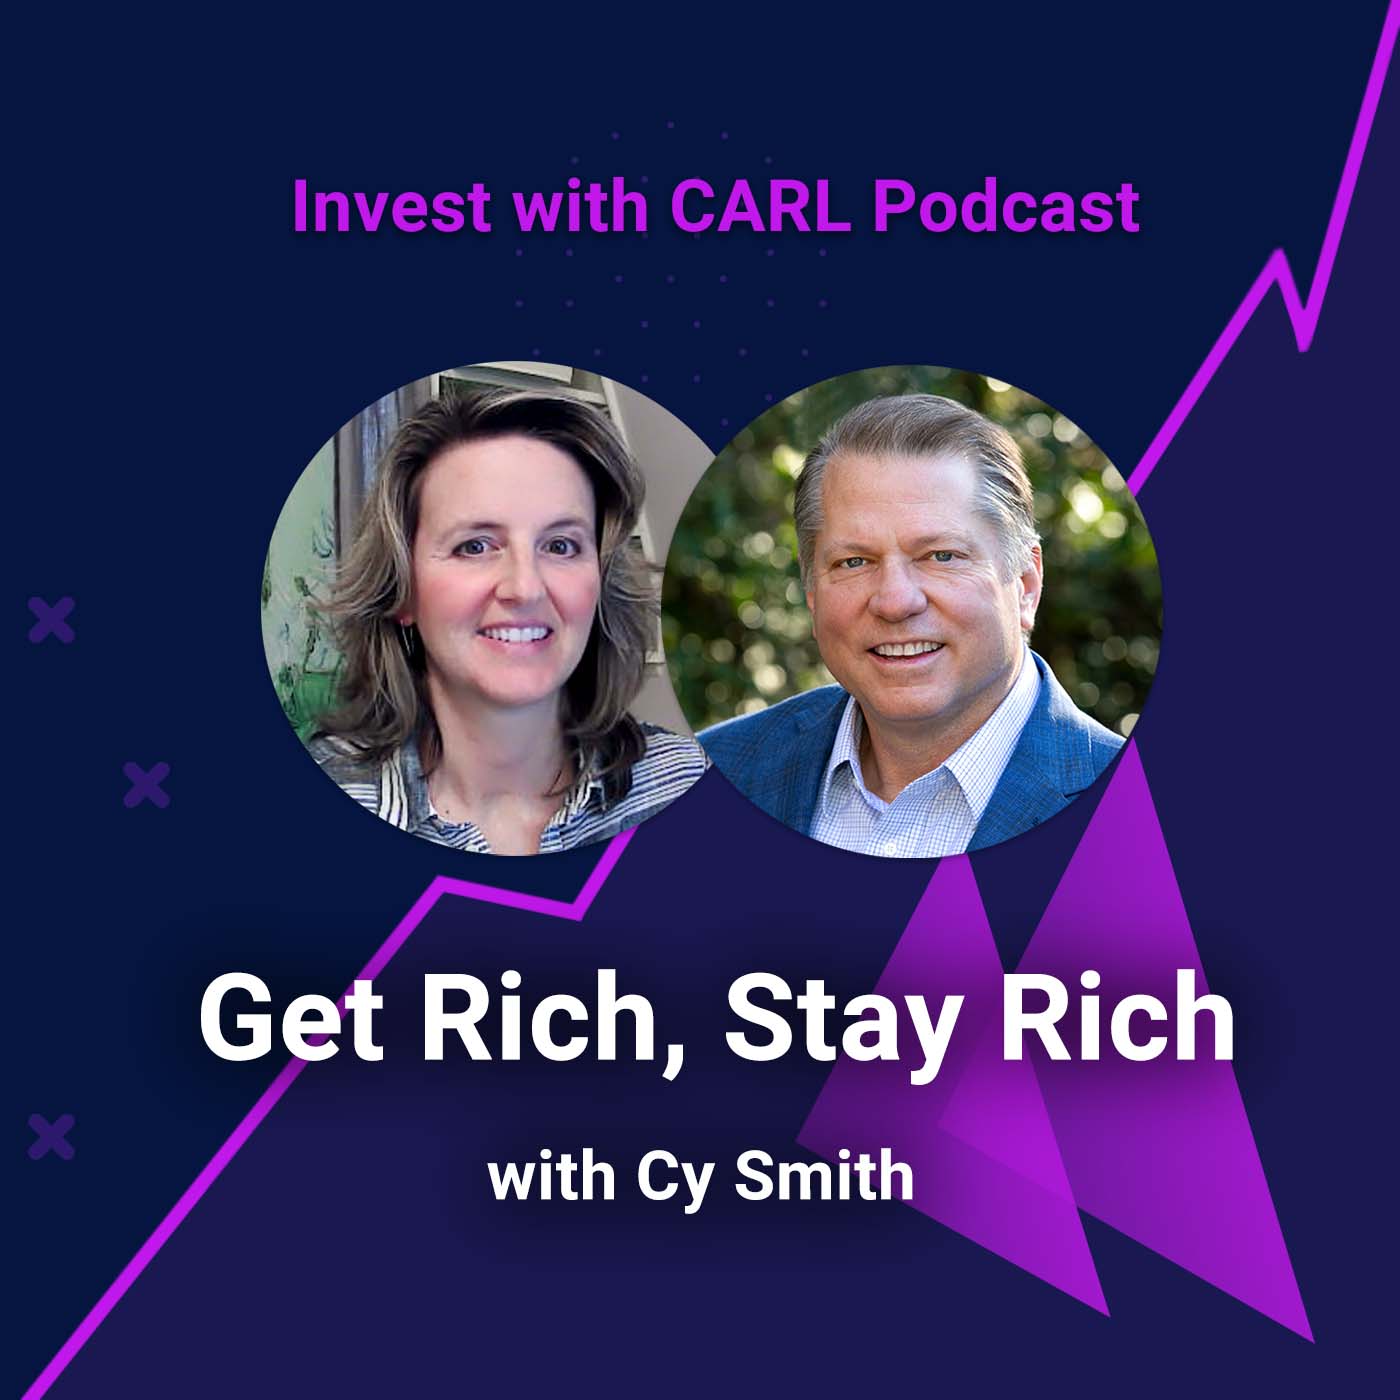 Get Rich Stay Rich with Cy Smith